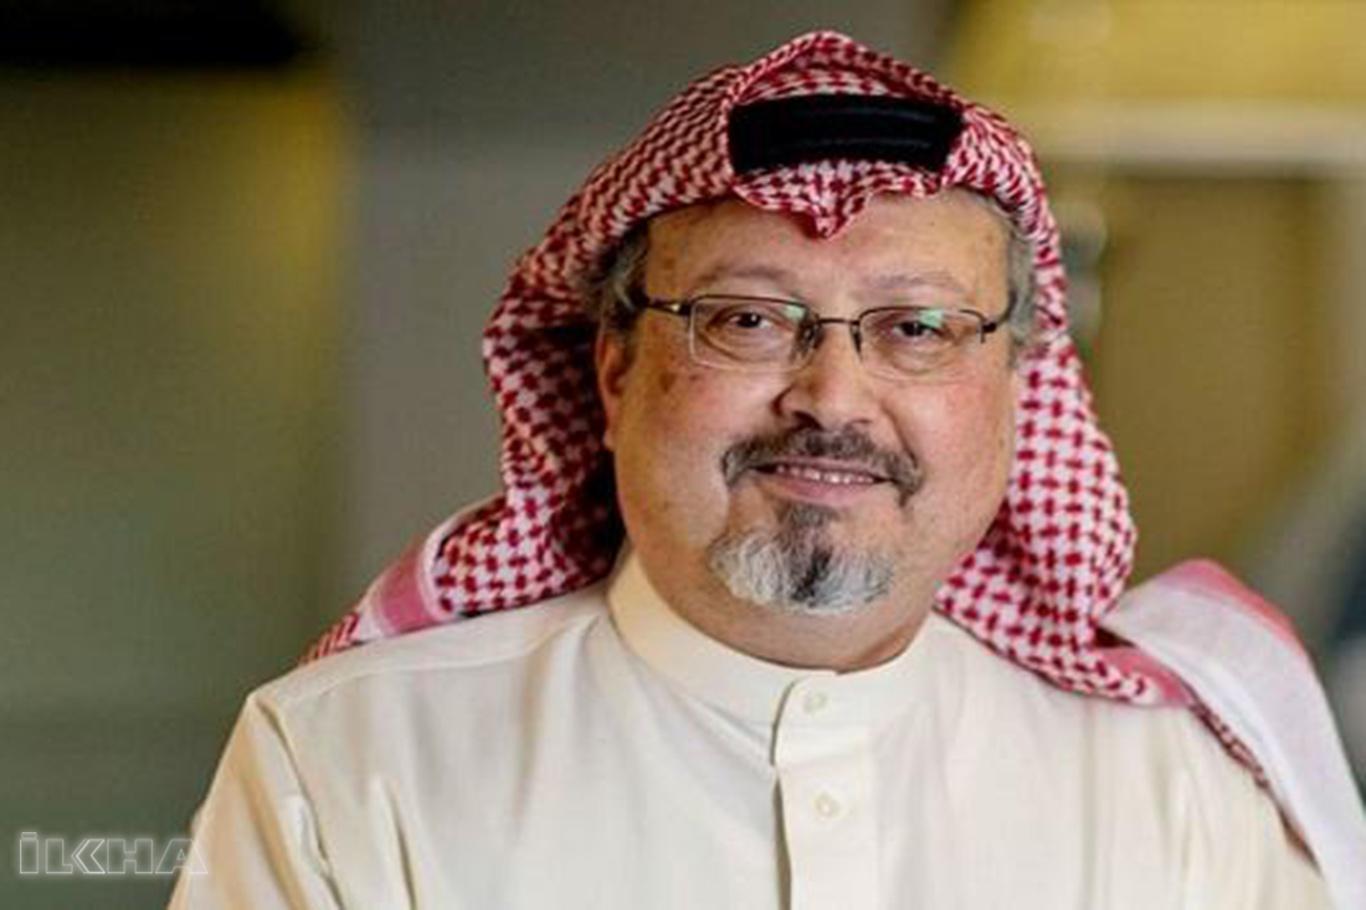 Alleged assassination of Jamal Khashoggi in Consulate would set abysmal new low: Amnesty